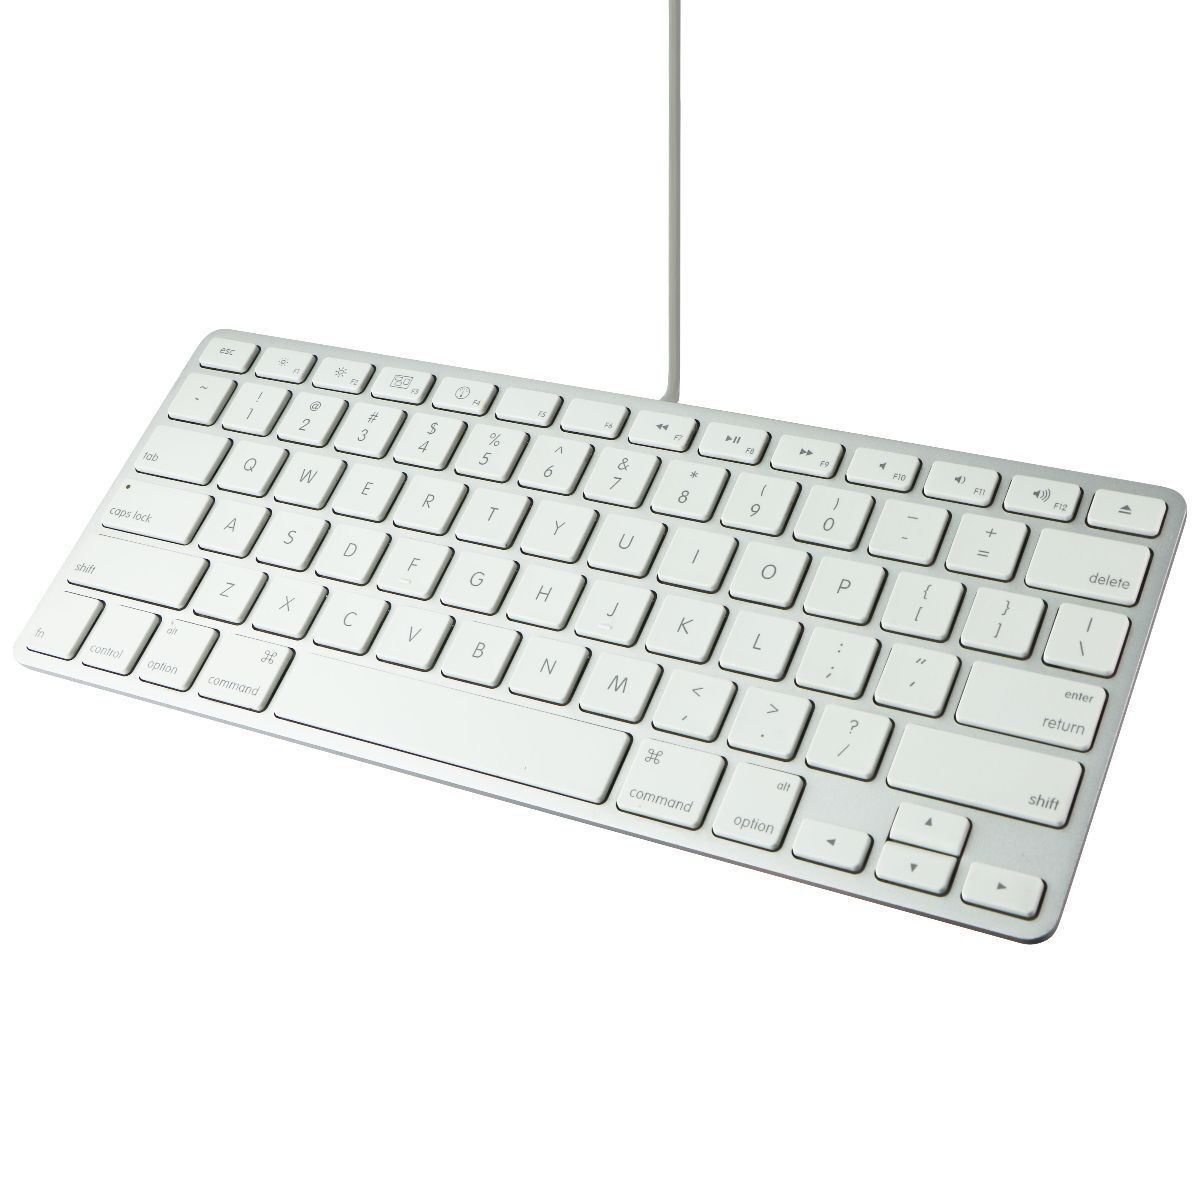 Apple Wired USB 78-Key Keyboard for Mac OS - Silver/White (A1242/MB869LL/A)